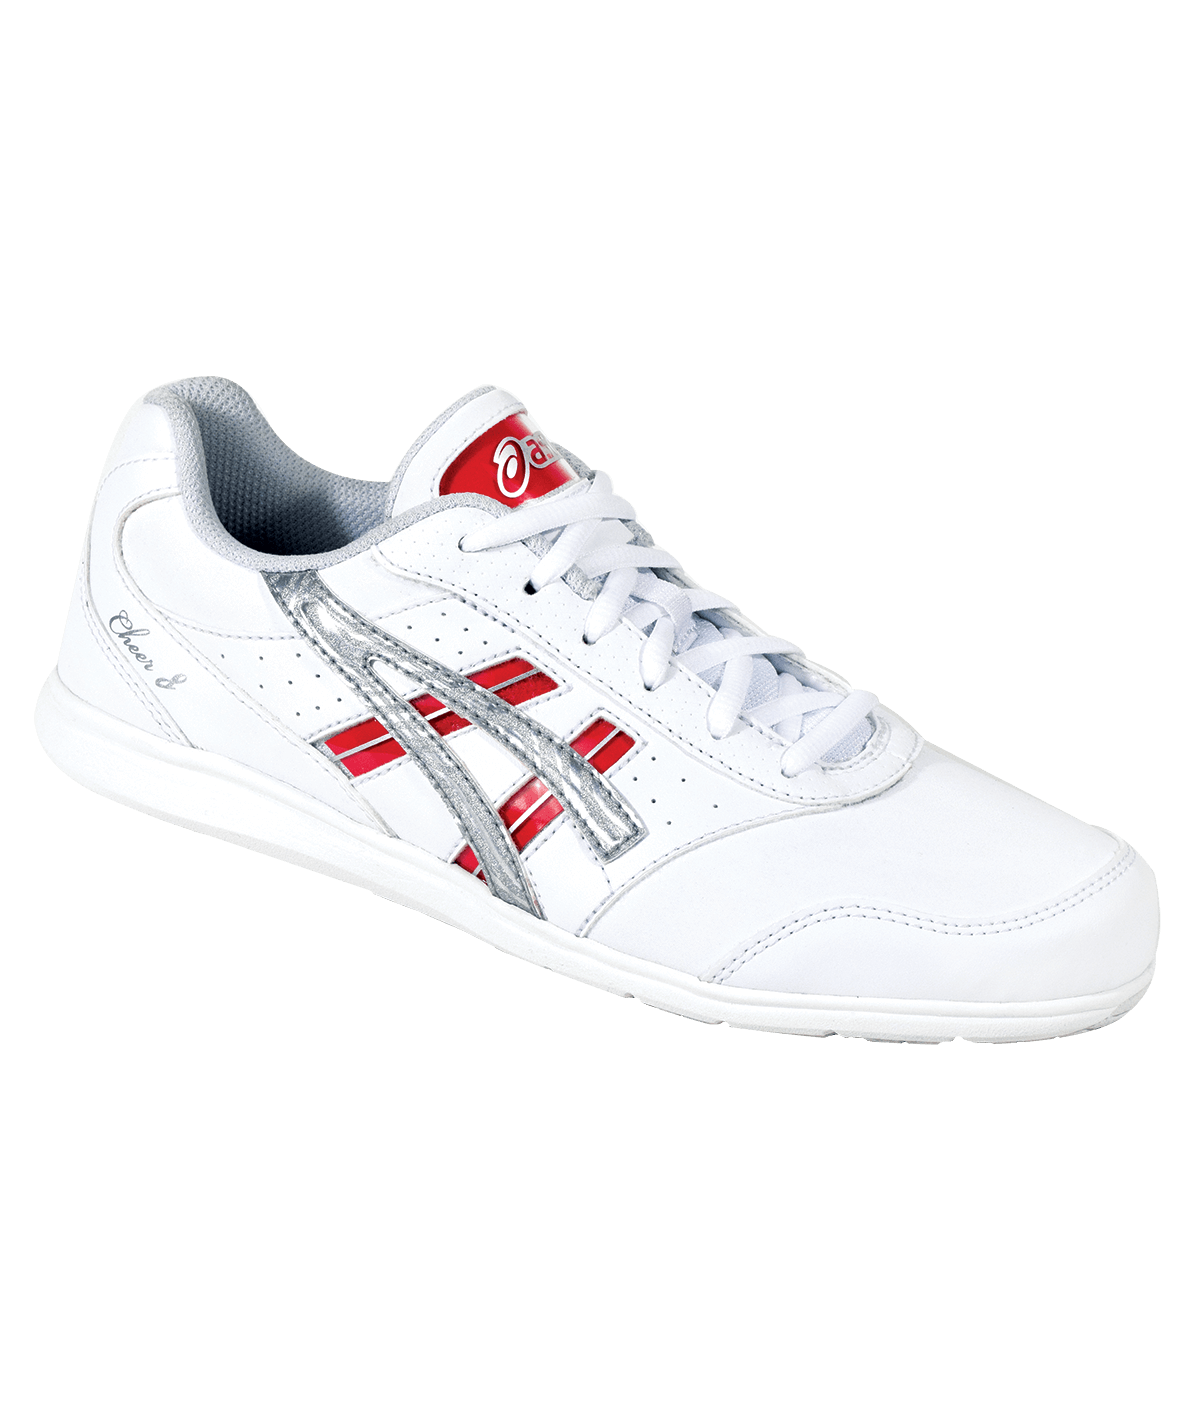 Asics Cheer Shoes: View Asics Cheerleading Shoes for Sidelines and  Competition | Omni Cheer